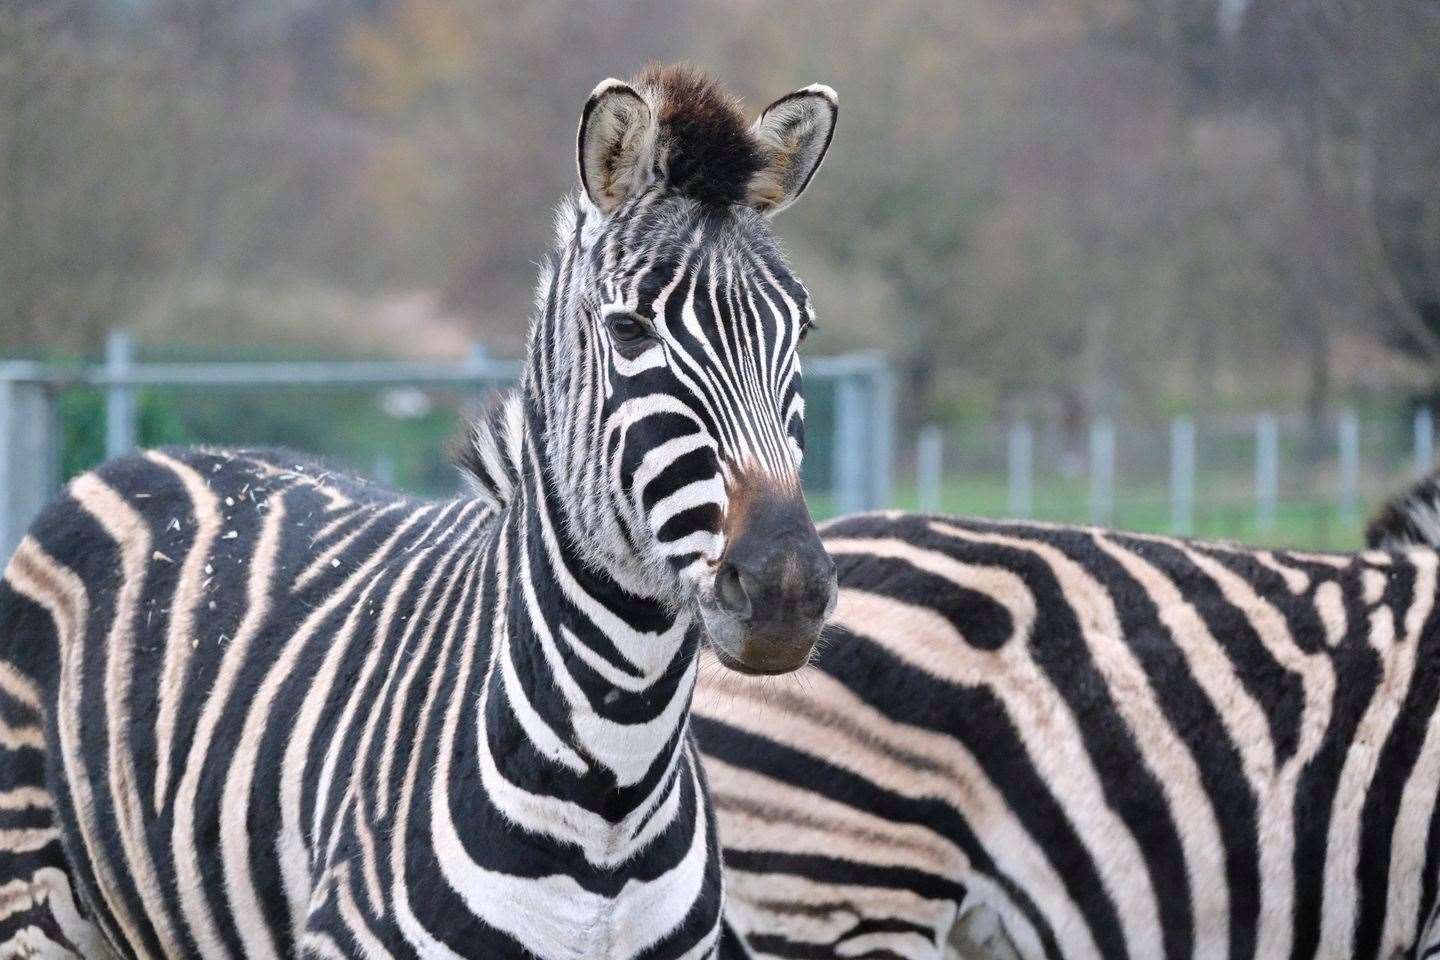 There is a zebra kept privately in Maidstone